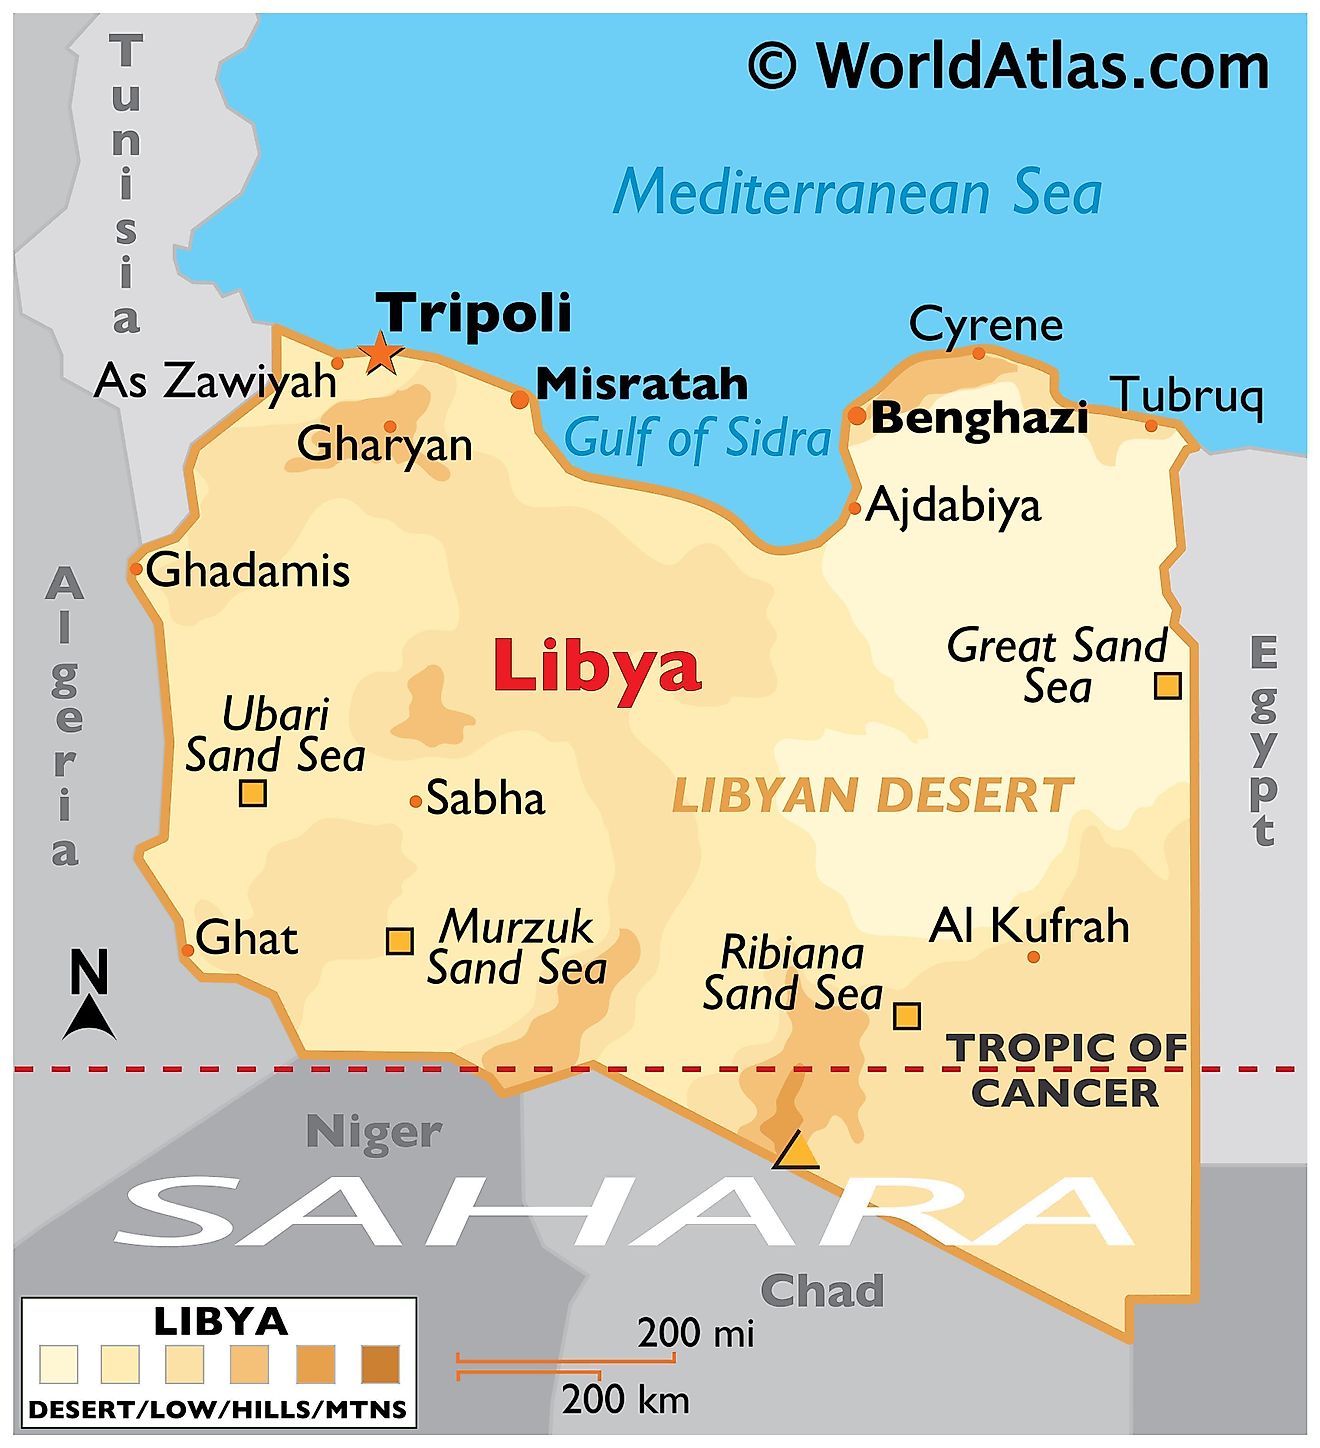 A physical map of Libya showing the country's borders, terrain, highest point, important cities, the desert and its sandy seas.